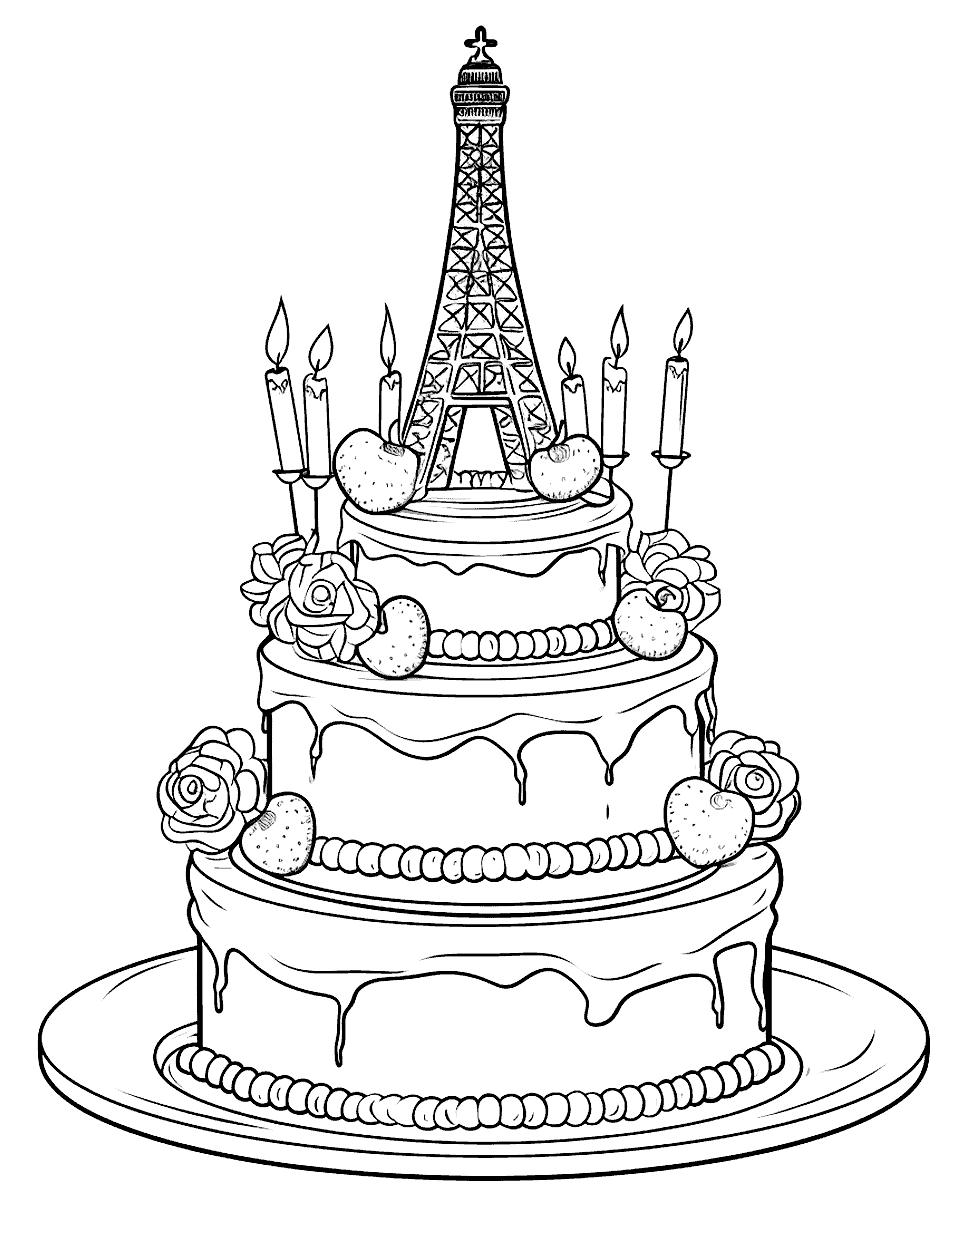 Parisian Elegance Cake Coloring Page - A cake with the Paris landmark like the Eiffel Tower.